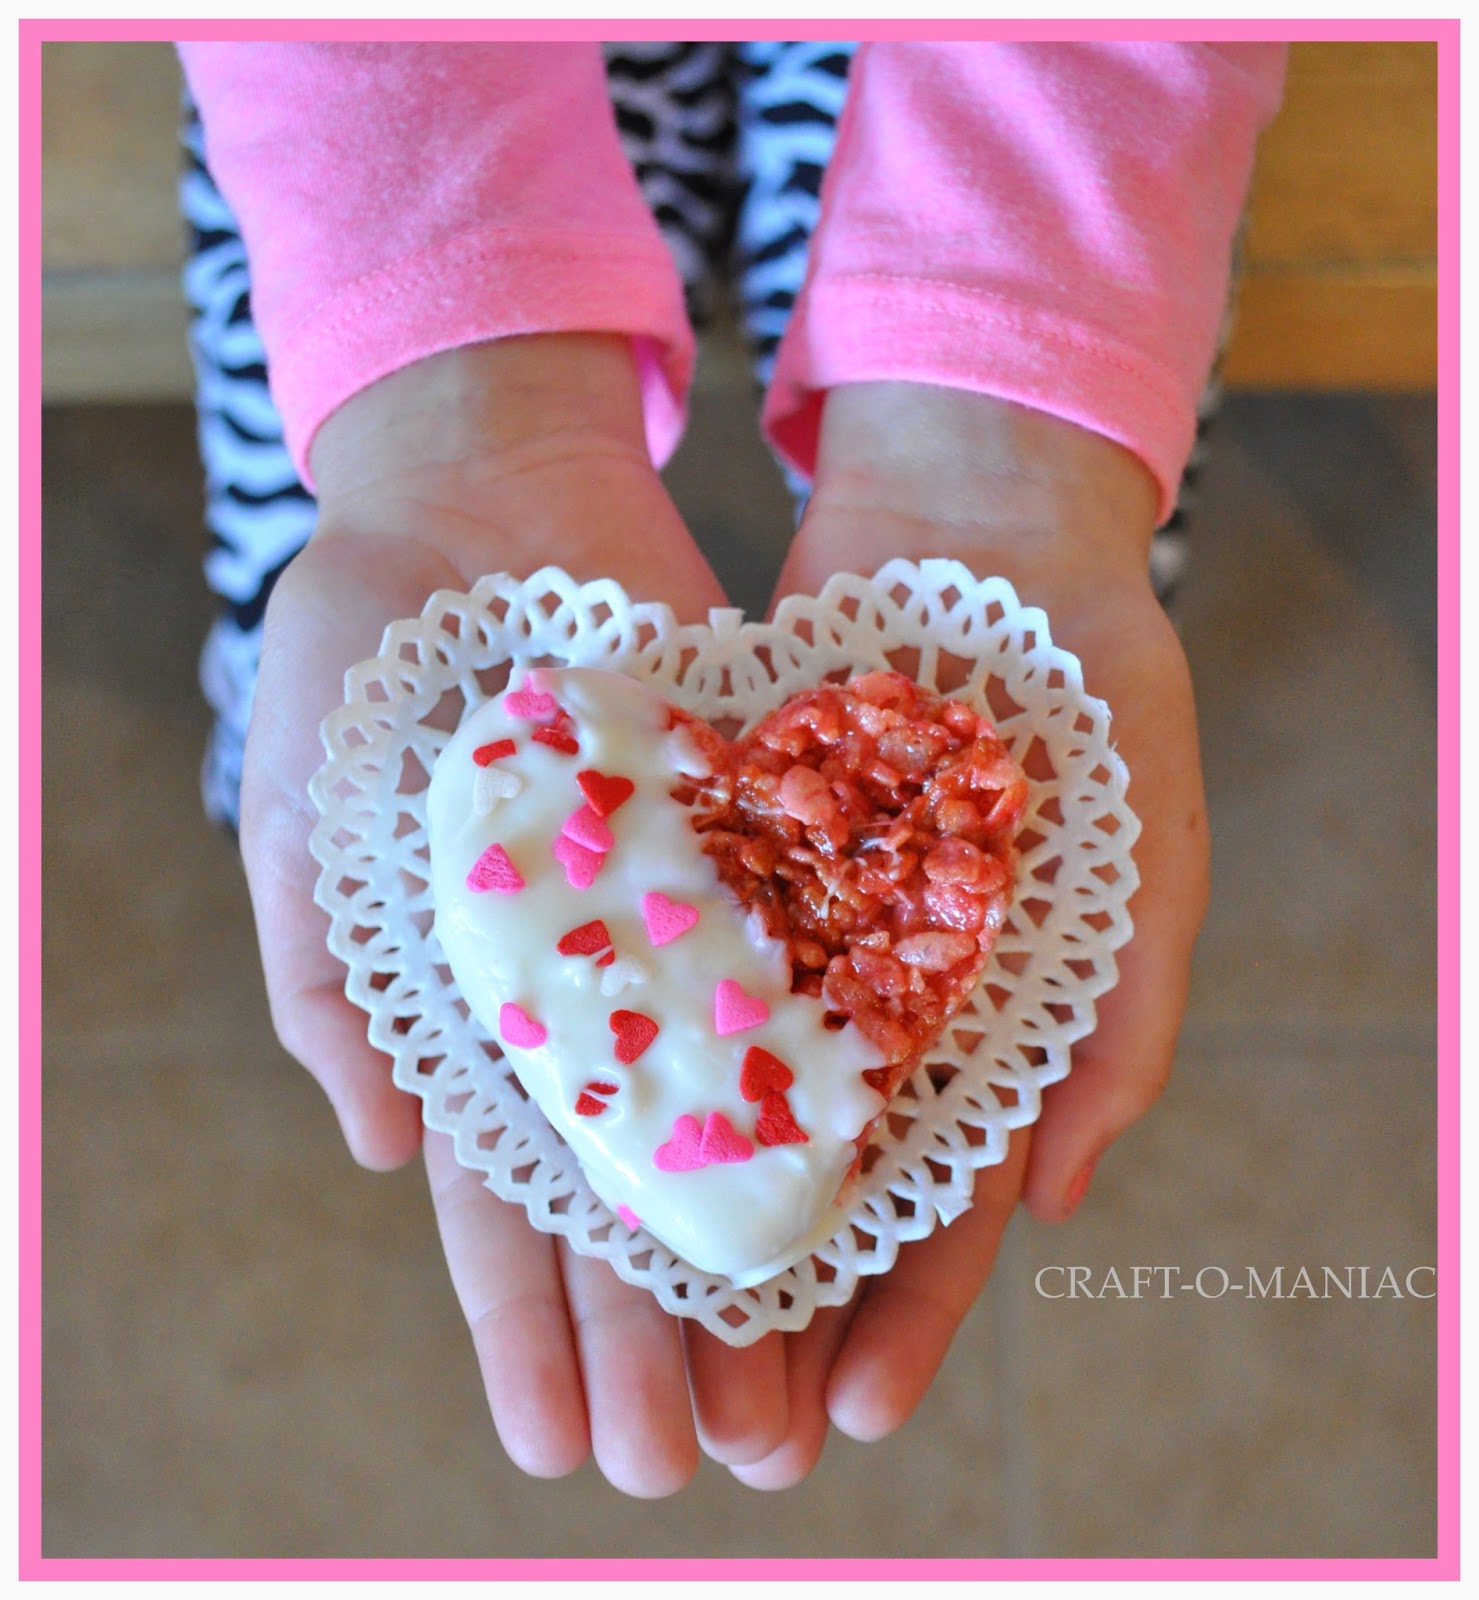 ... milk and on some cute paper dollie hearts, MY KIDS WERE TICKLED PINK